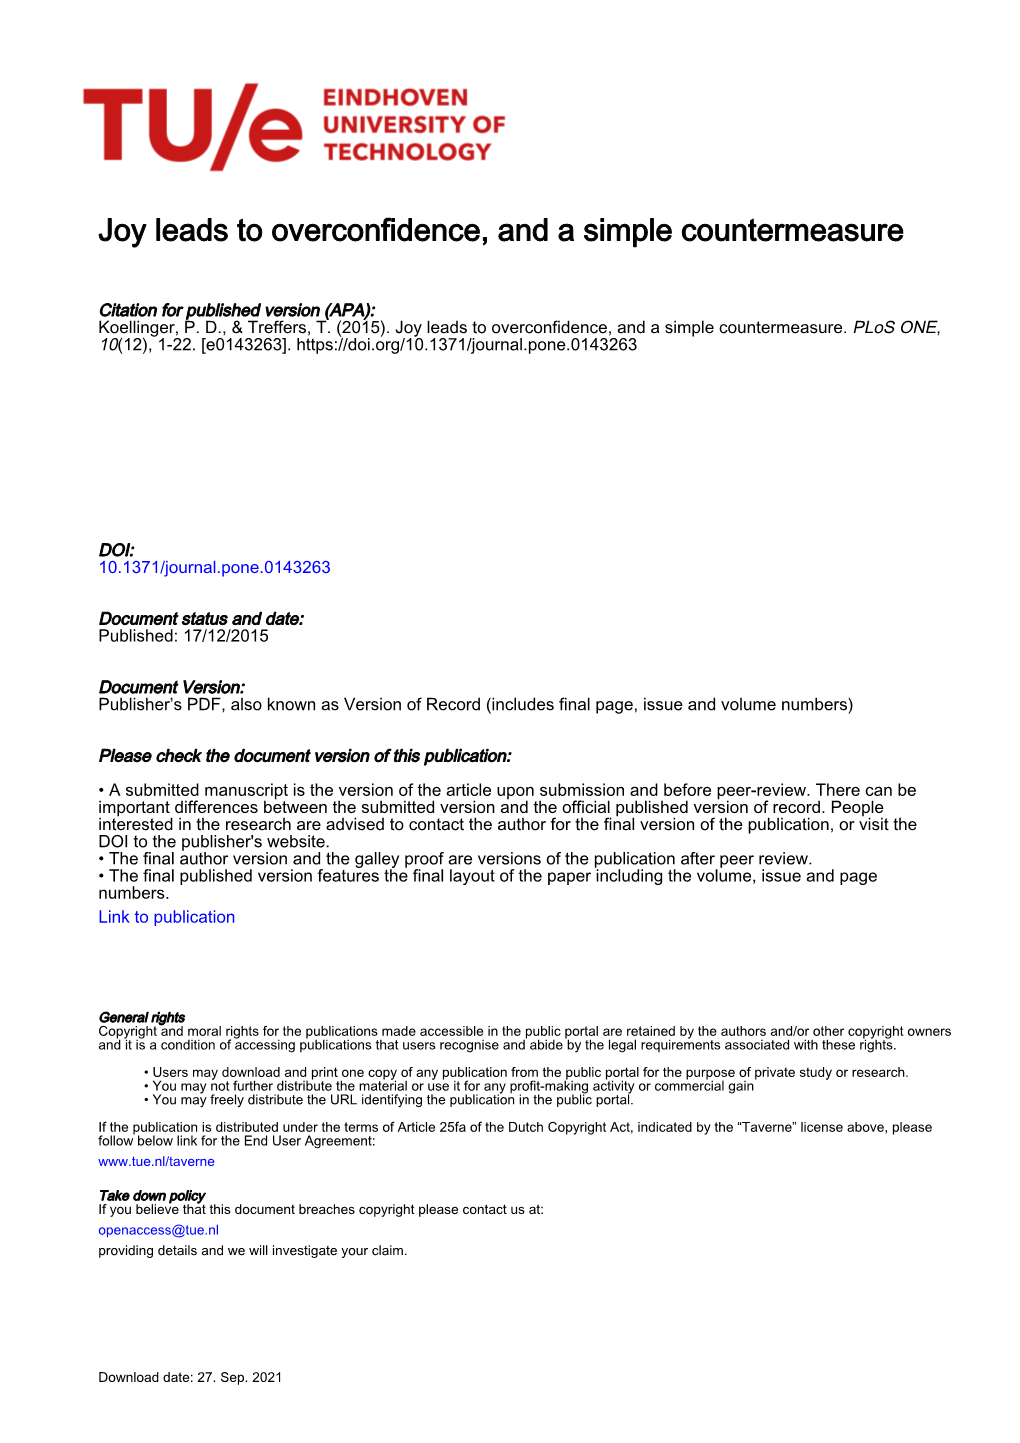 Joy Leads to Overconfidence, and a Simple Countermeasure